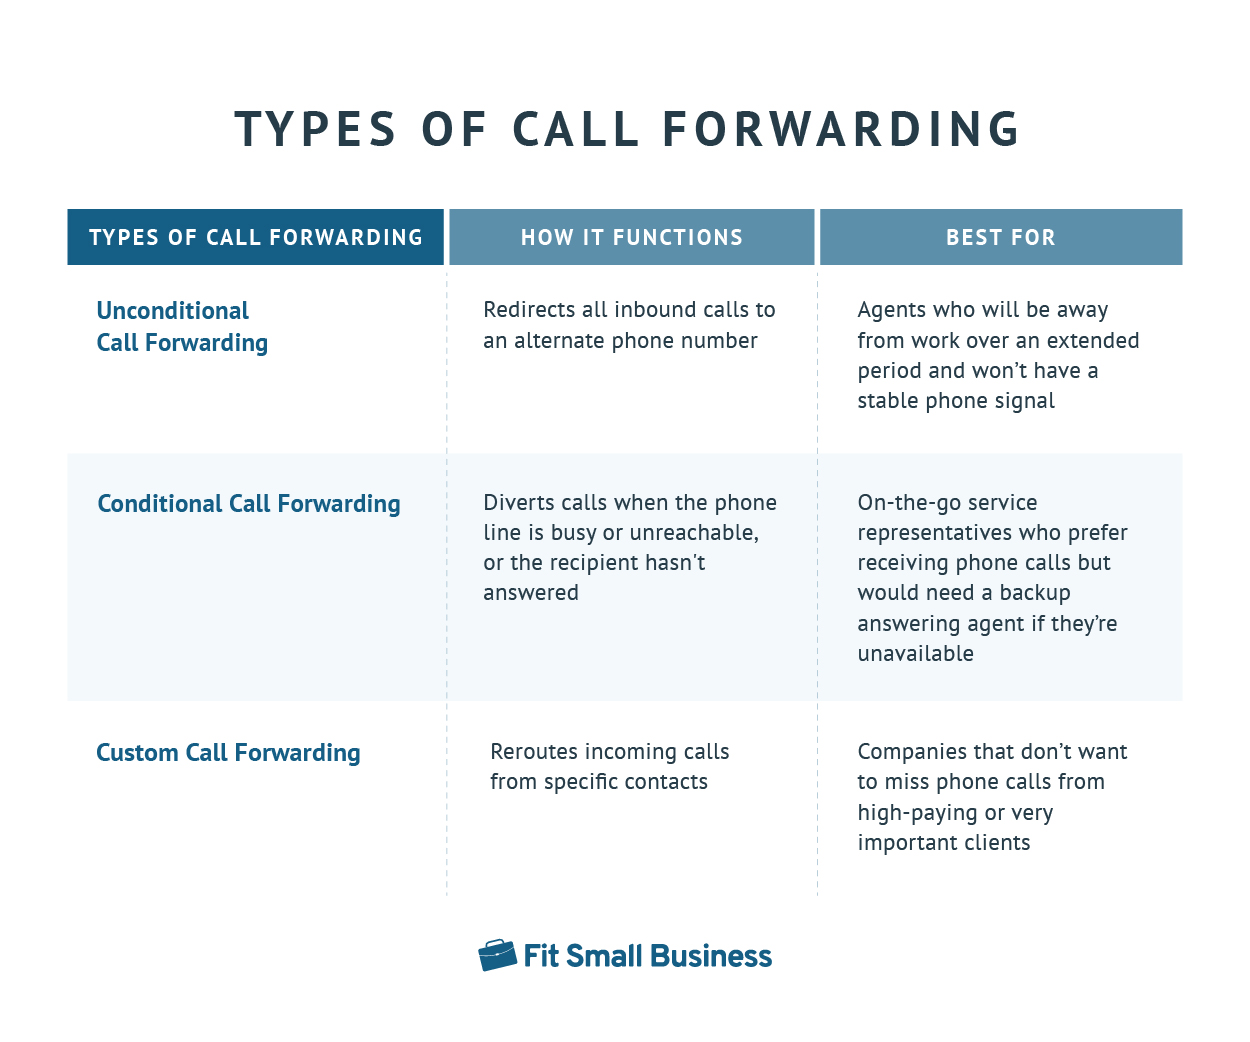 An infographic titled "Types of Call Forwarding".